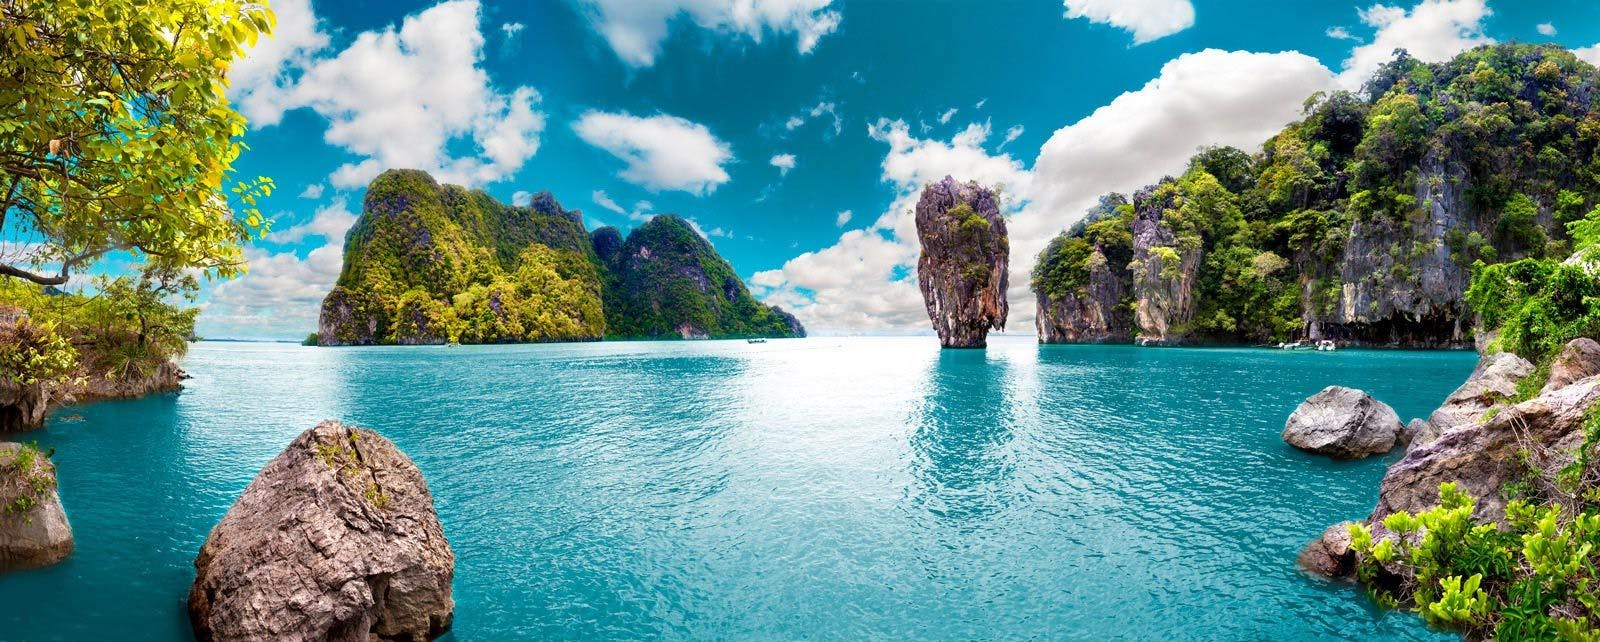 Large limestone rocks rising from the sea in a bay in Thailand